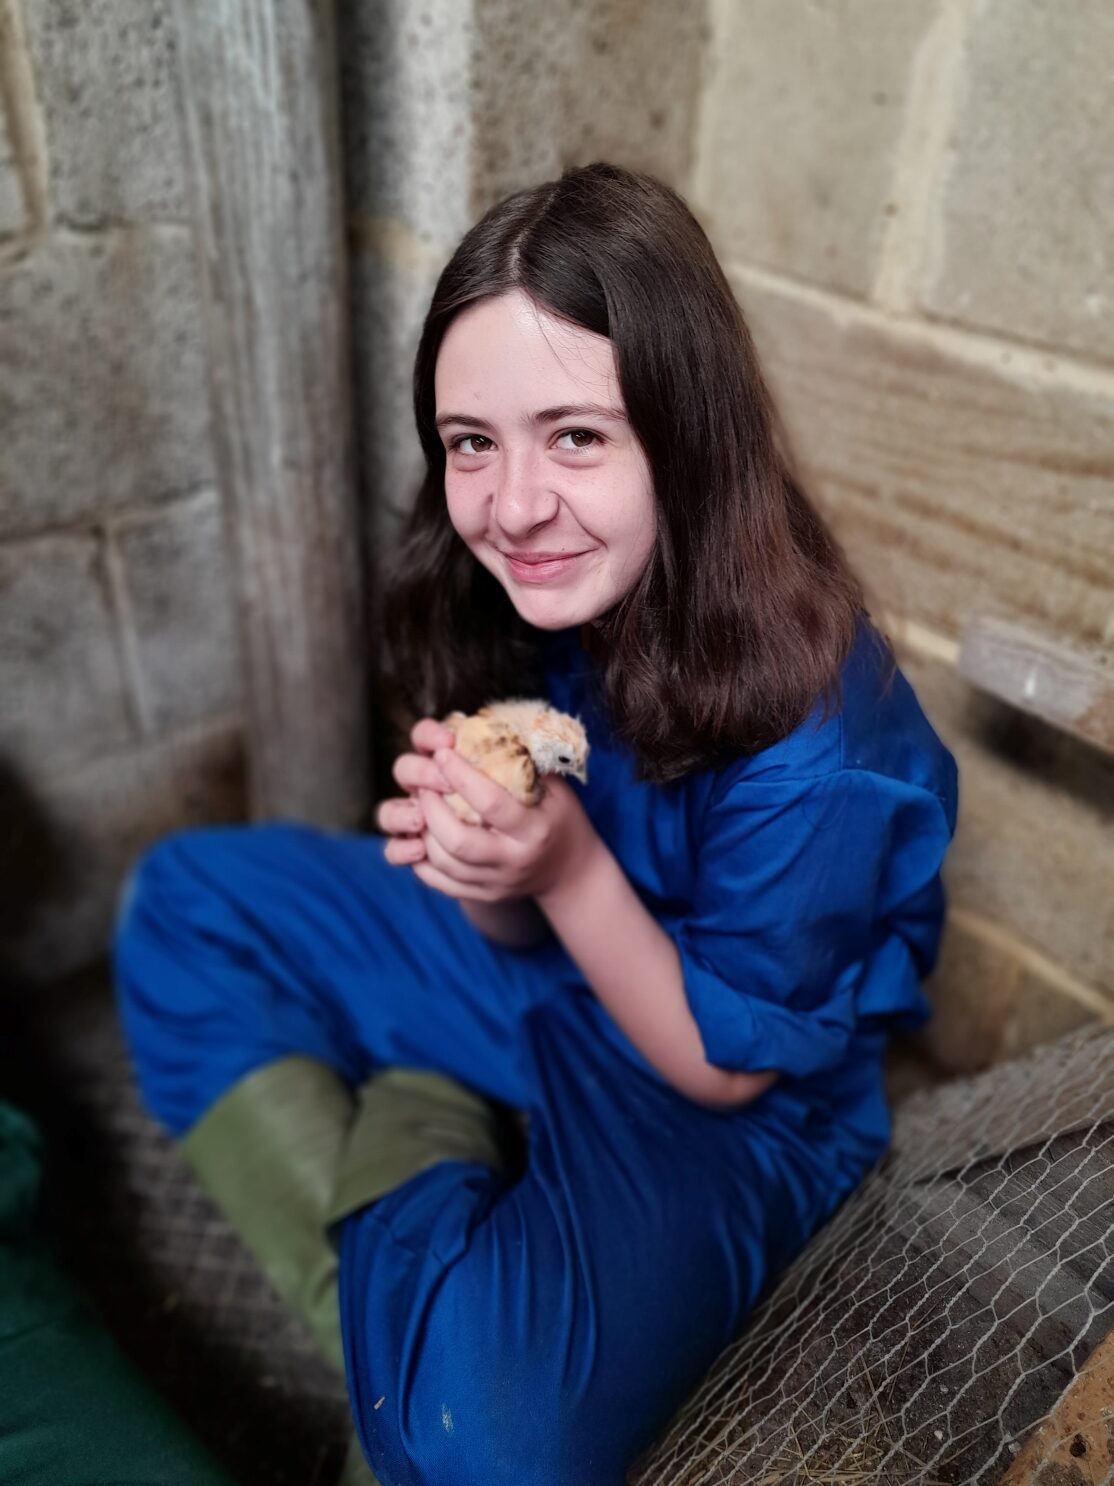 Girl in blue overalls holding a chicken and smiling